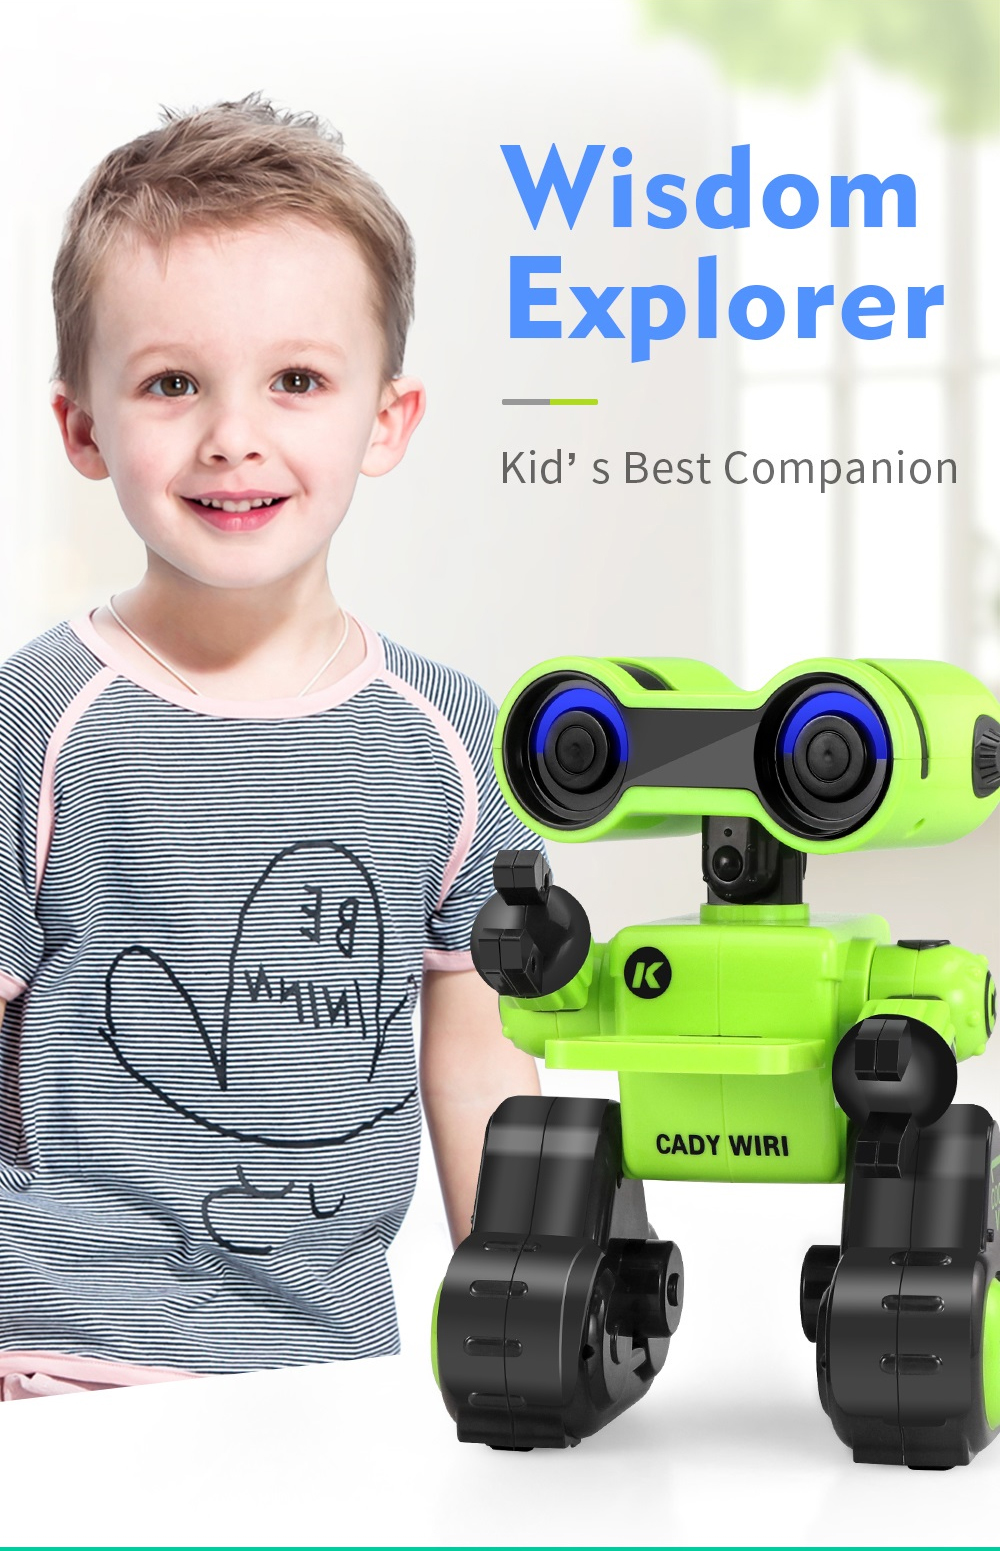 JJRC R13 - YW CADY WIRI Power Robot Intelligent Science Exploration Toy Gift